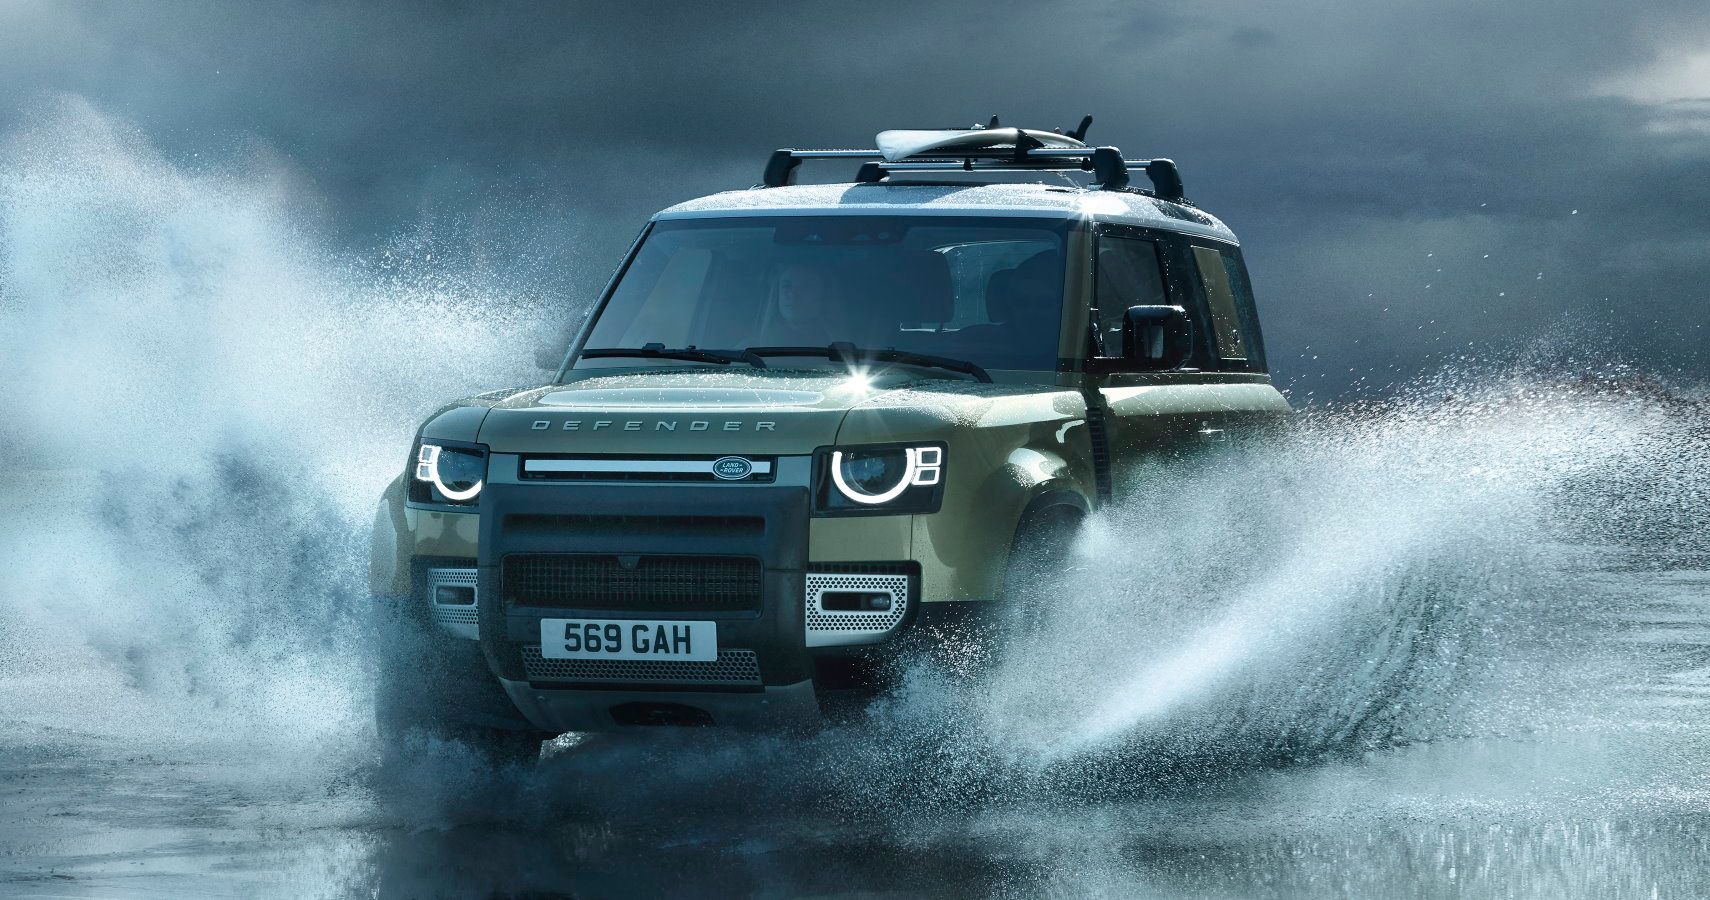 The 2020 Land Rover Defender Is An Old Throwback Stuffed With New Technology